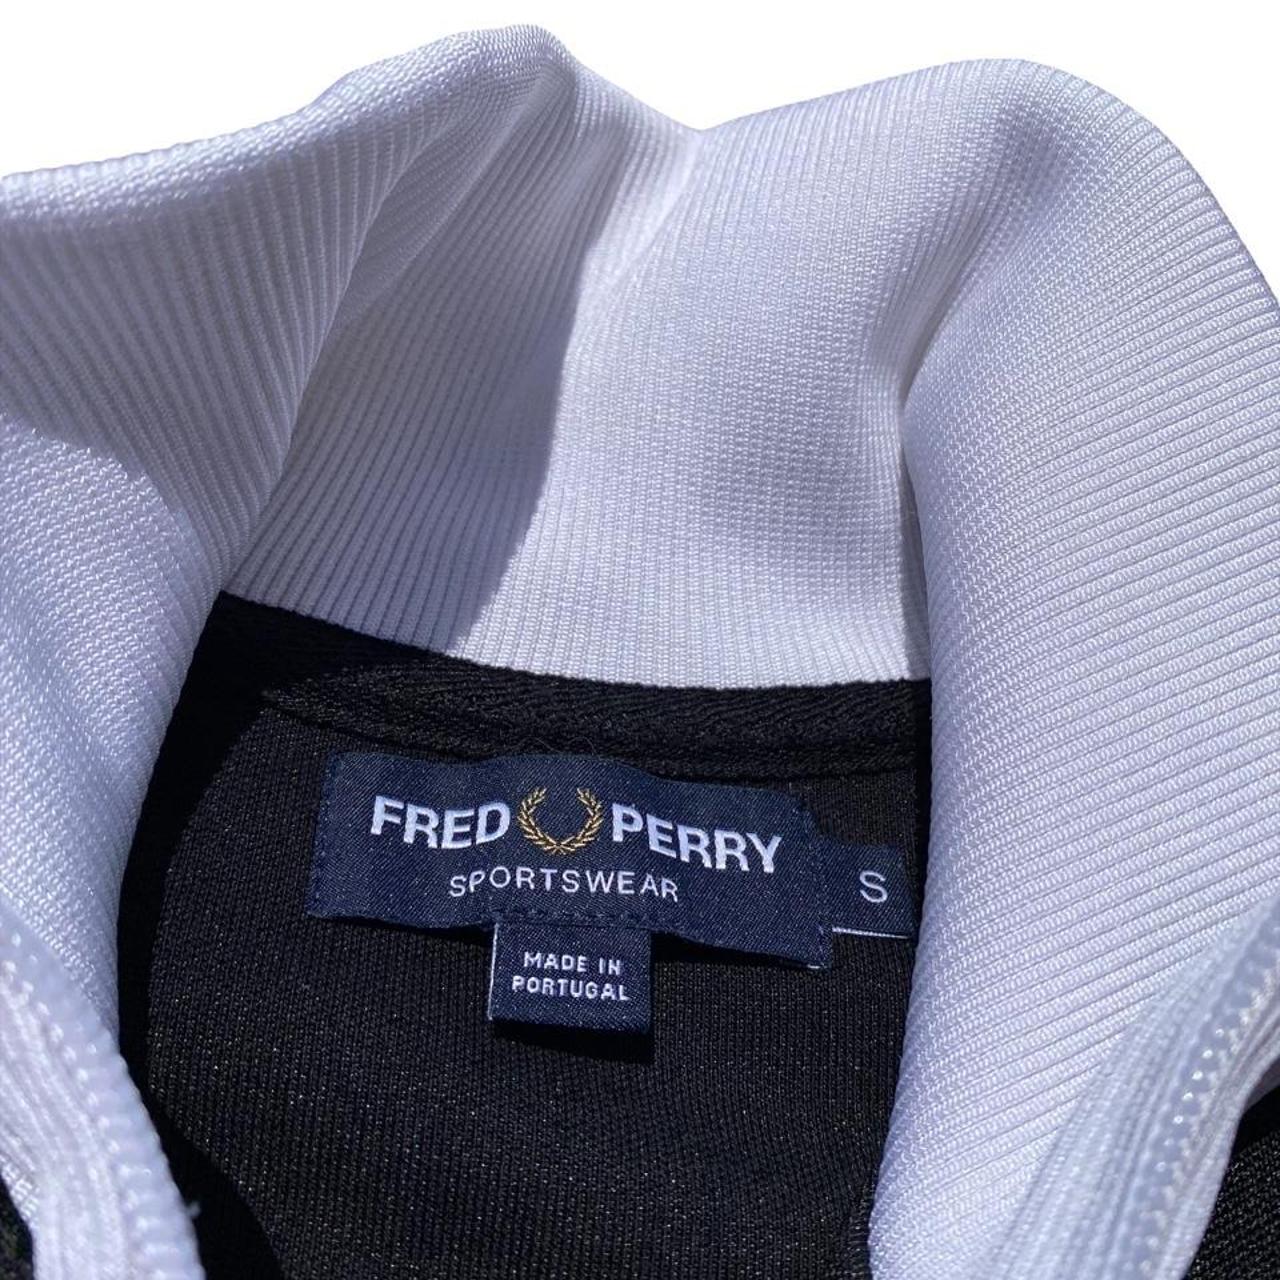 Product Image 3 - Vintage Fred Perry Jacket 

Size: